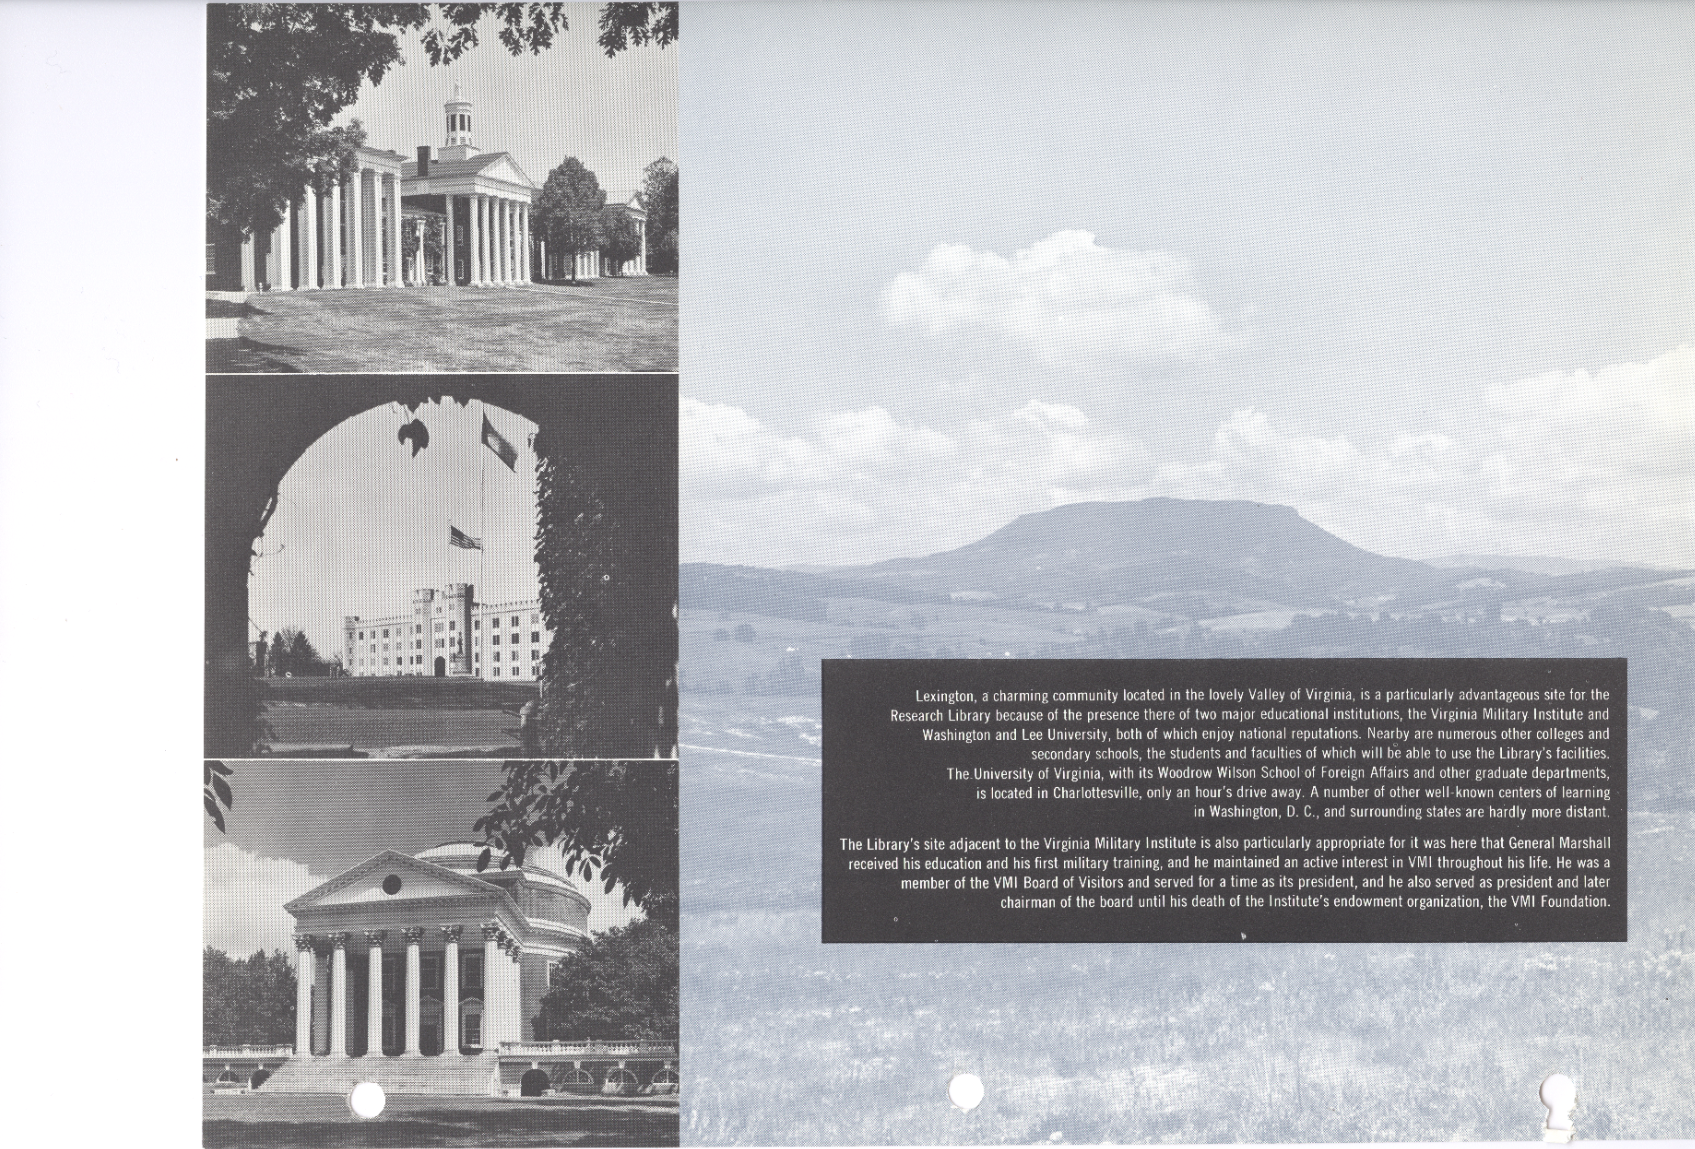 Another page from the brochure explains the reasons for picking the location of the George C. Marshall Research Library.